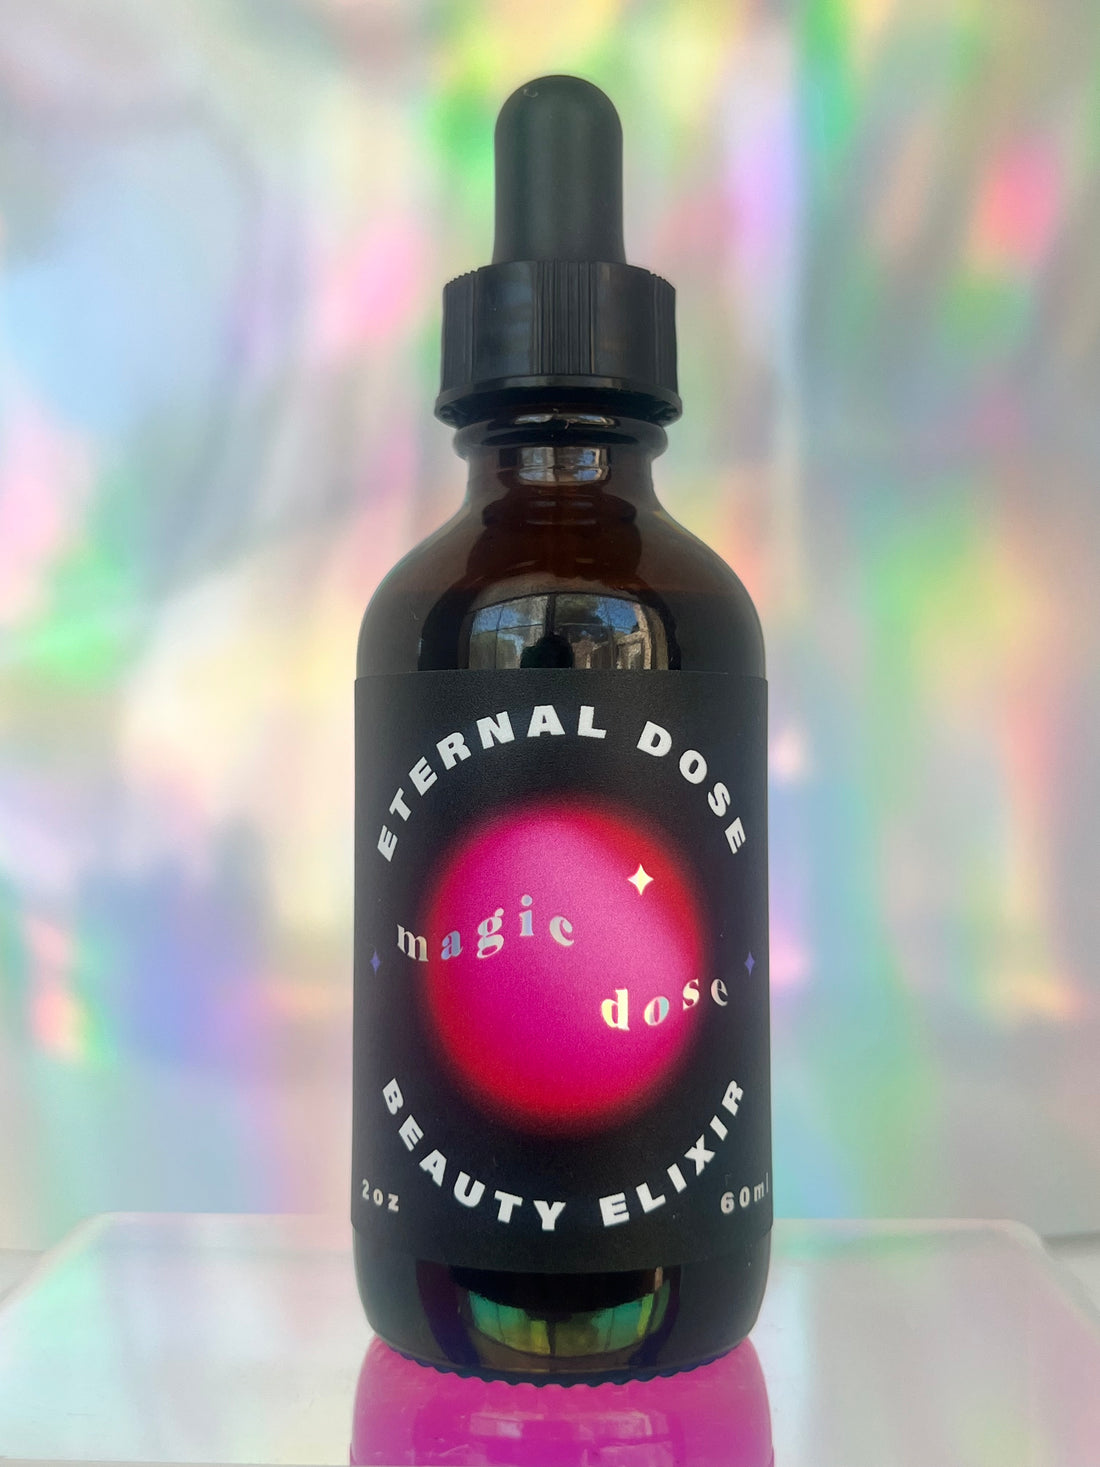 eternal dose (formerly luminous dose)